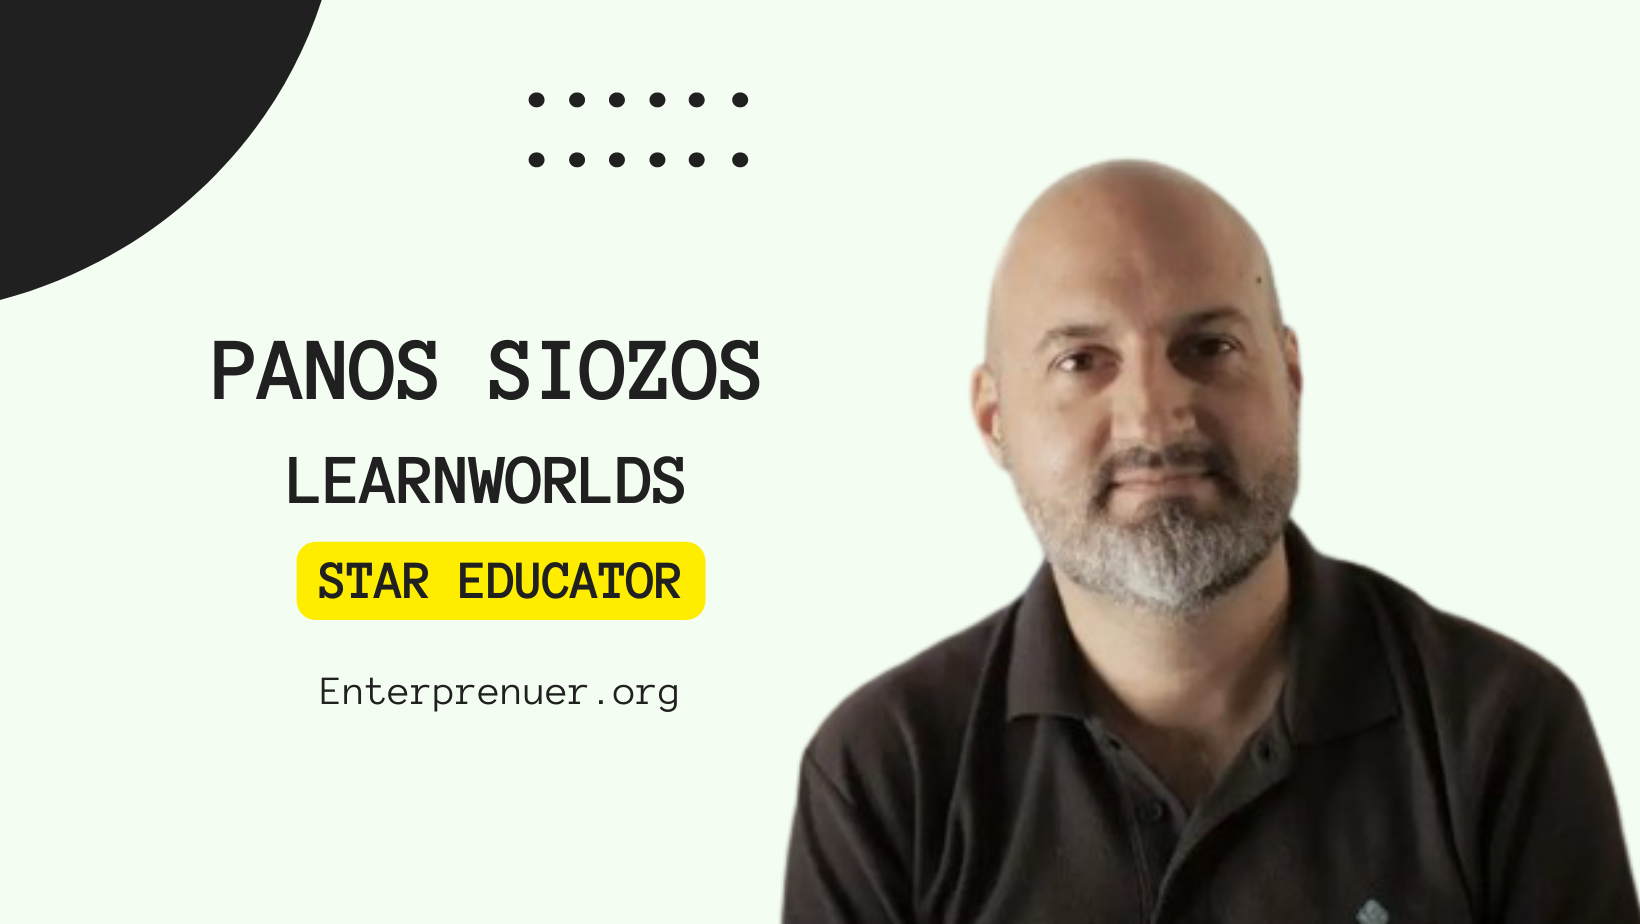 Meet Star Educator Panos Siozos, Co-Founder of LearnWorlds